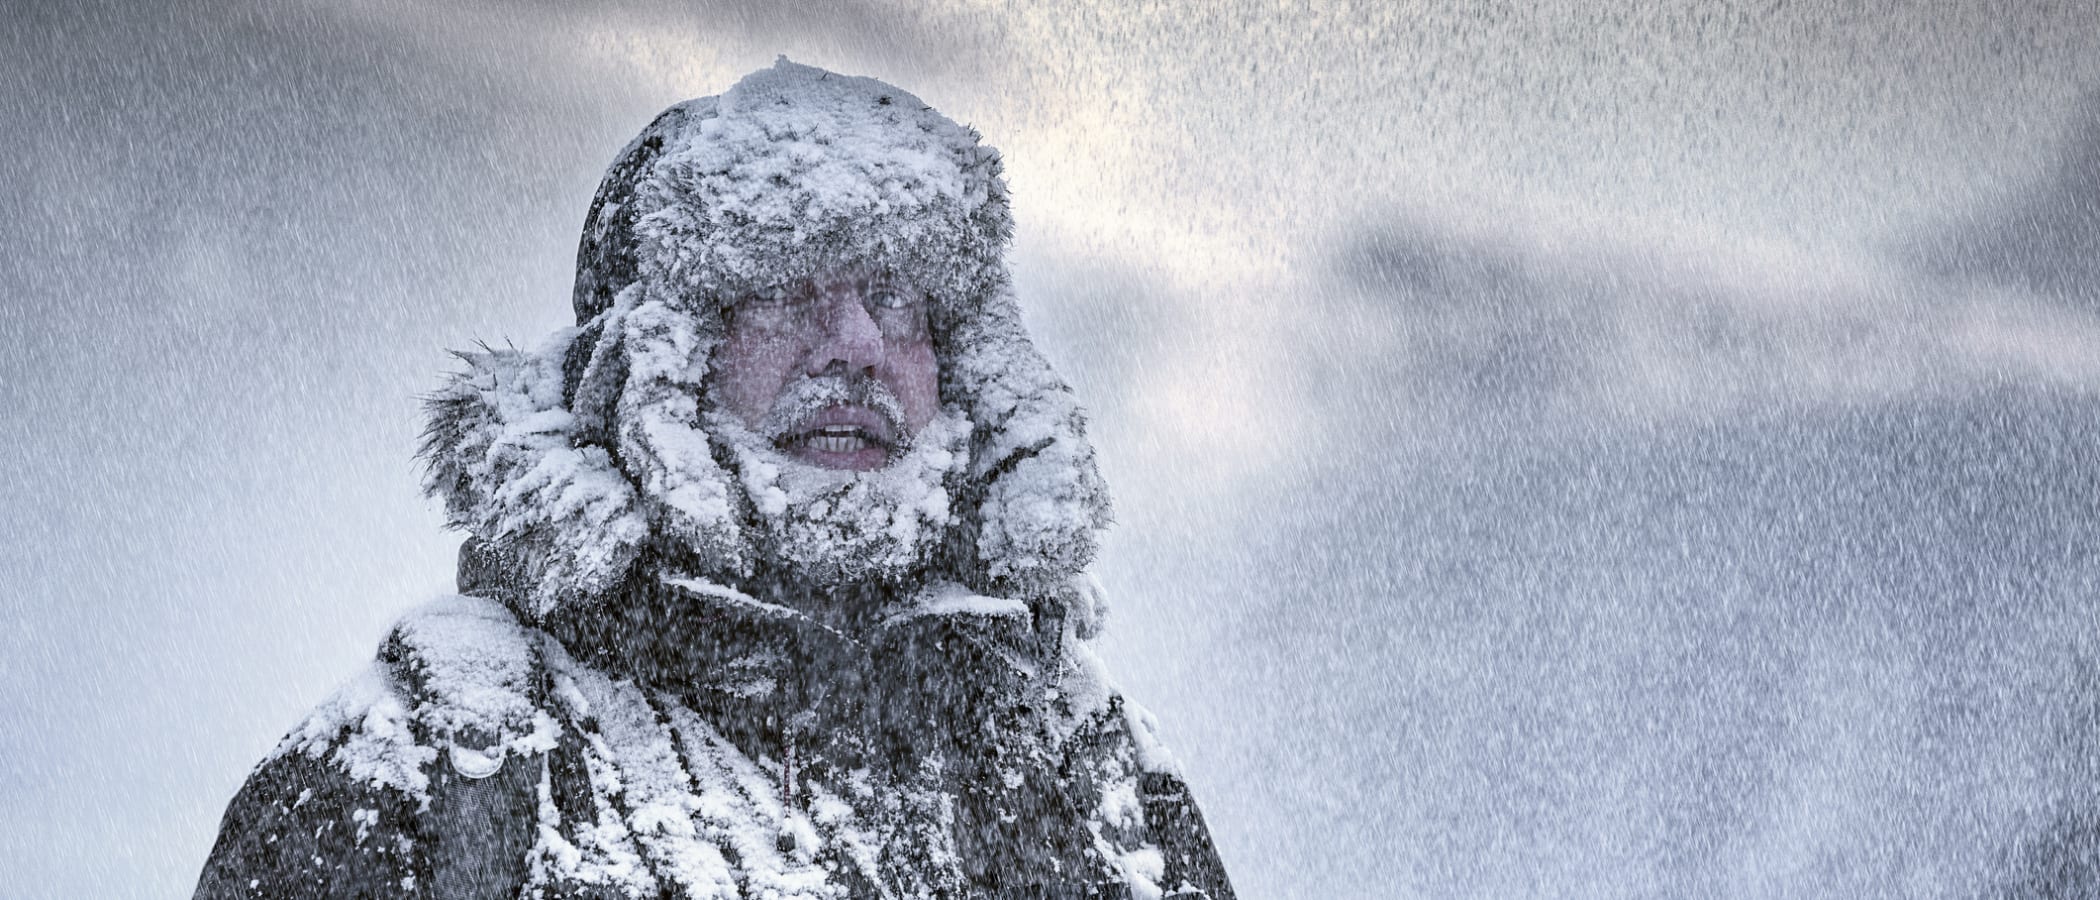 How to Protect Against Winter Weather Hazards, Extreme Cold